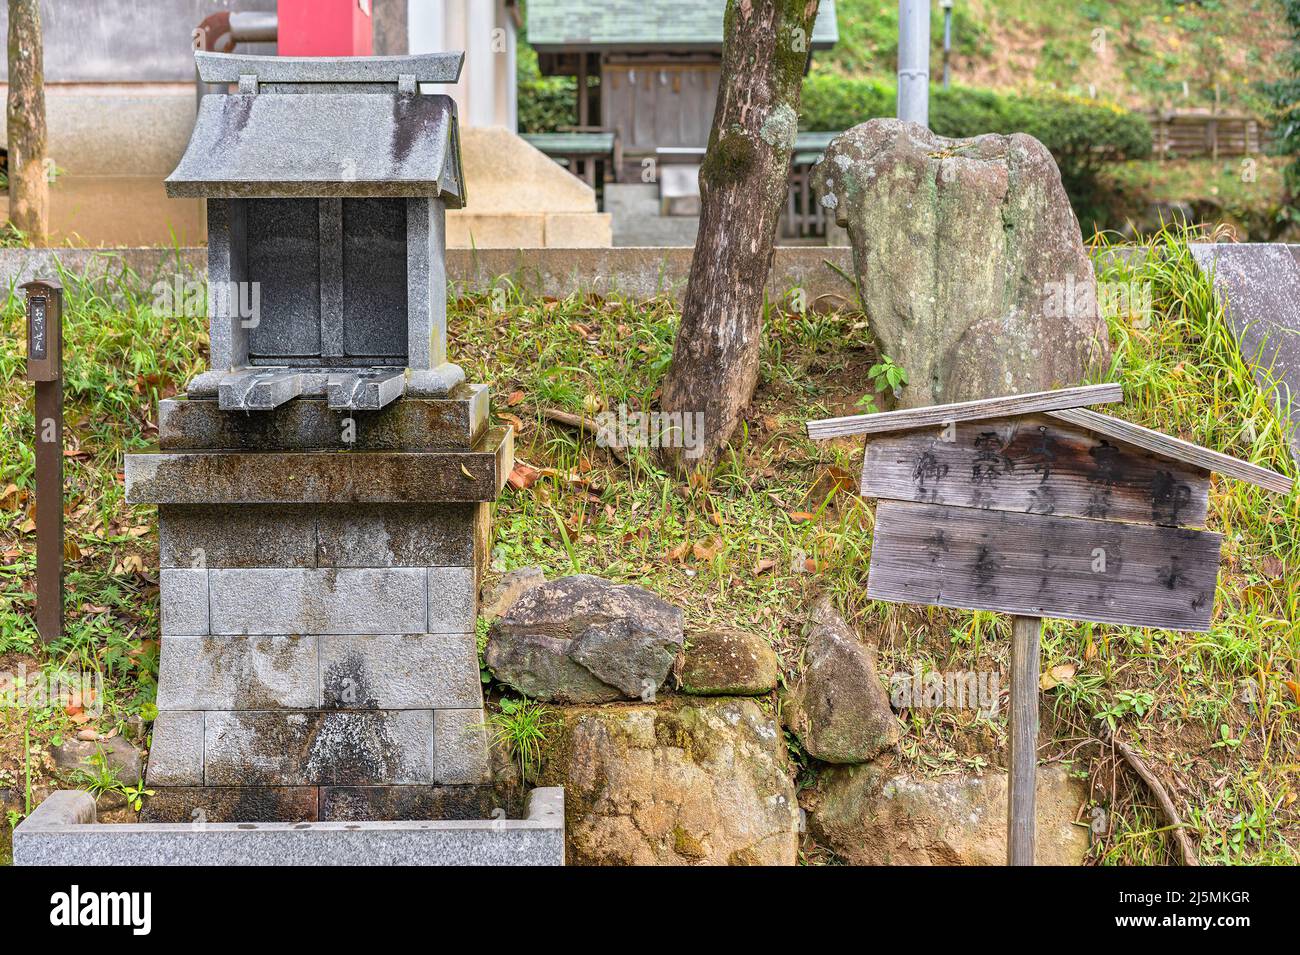 tokyo, japan - december 08 2021: Tiny stone shrine housing a sacred divine water source called Goshinsui known as a spiritual spot by worshippers in t Stock Photo